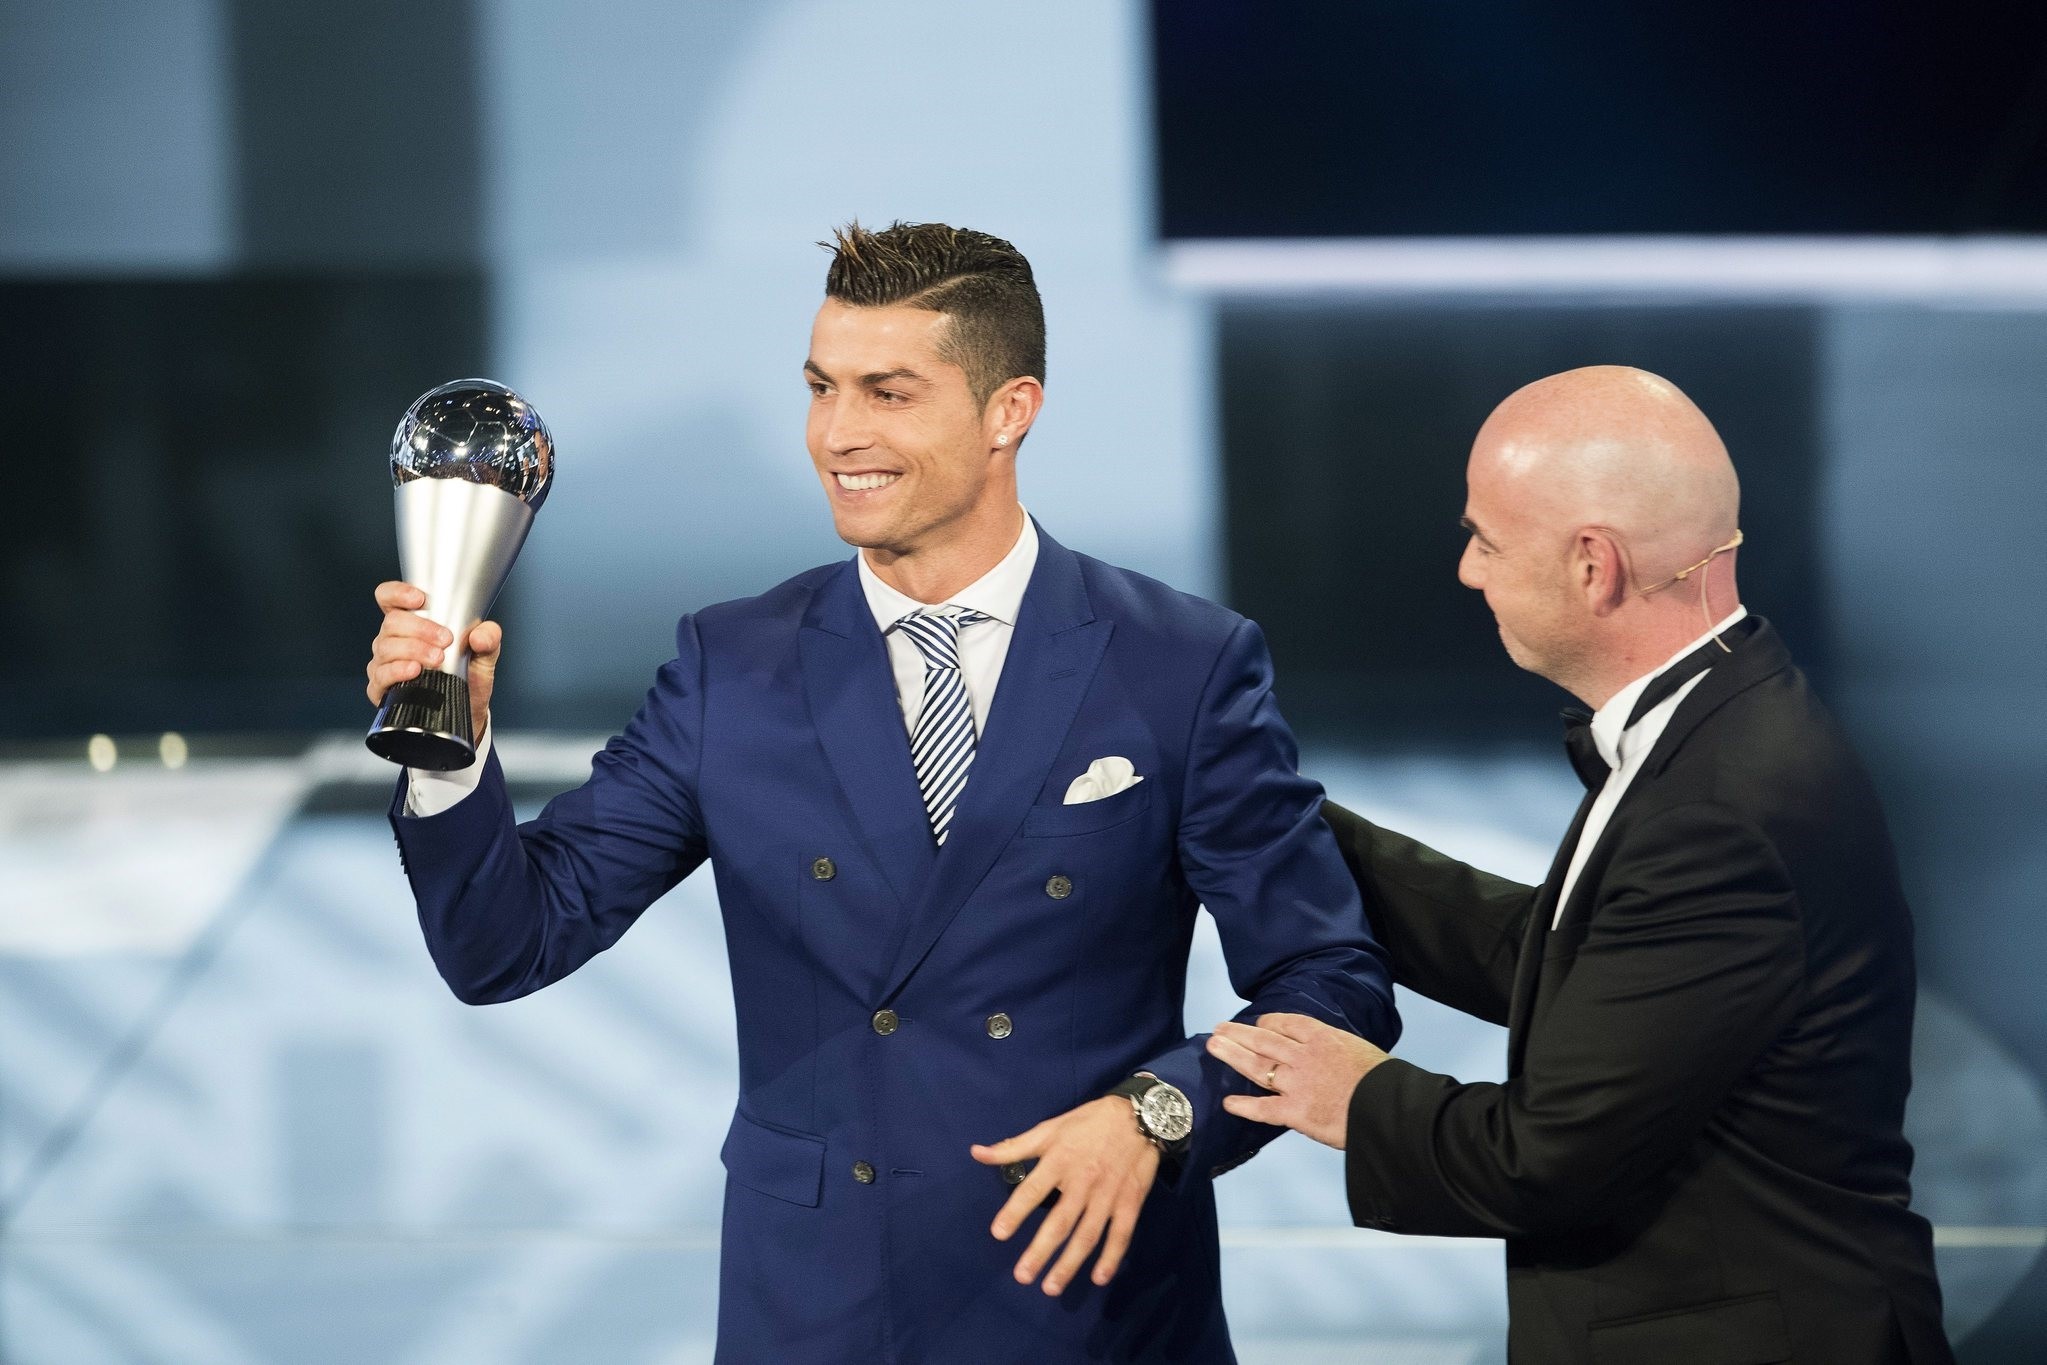 Ronaldo (L) lifts his trophy after winning the FIFA Men's Player of the Year 2016 award during the FIFA Awards 2016 gala at the Swiss TV studio in Zurich, Switzerland. (EPA Photo)